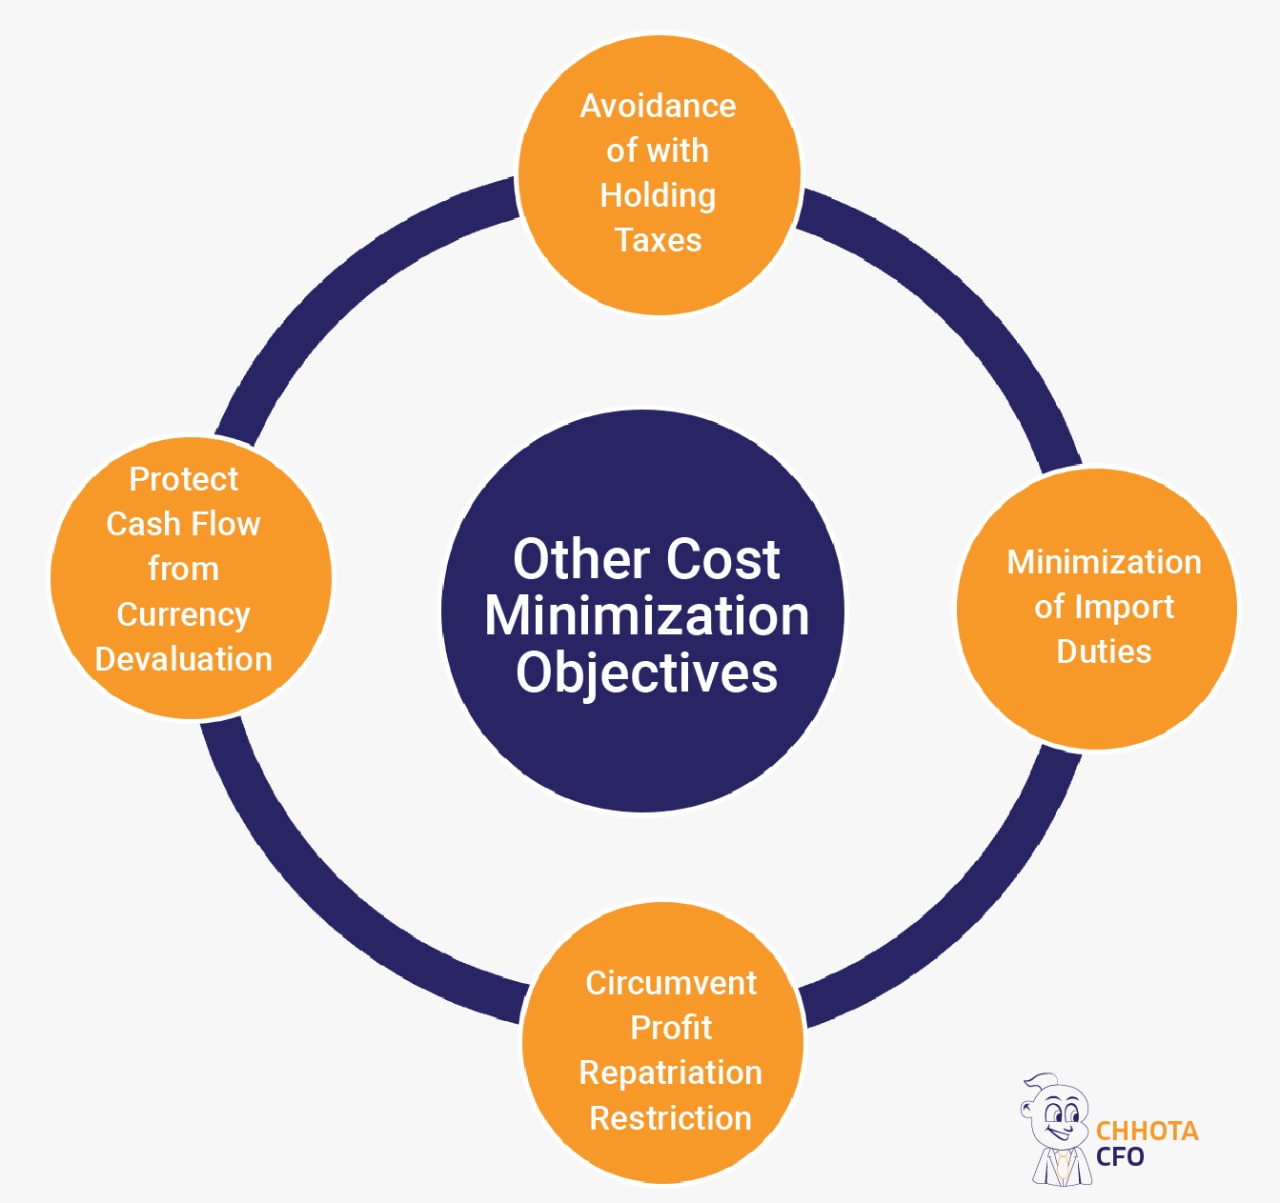 OBJECTIVES OF OTHER COST MINIMIZATION